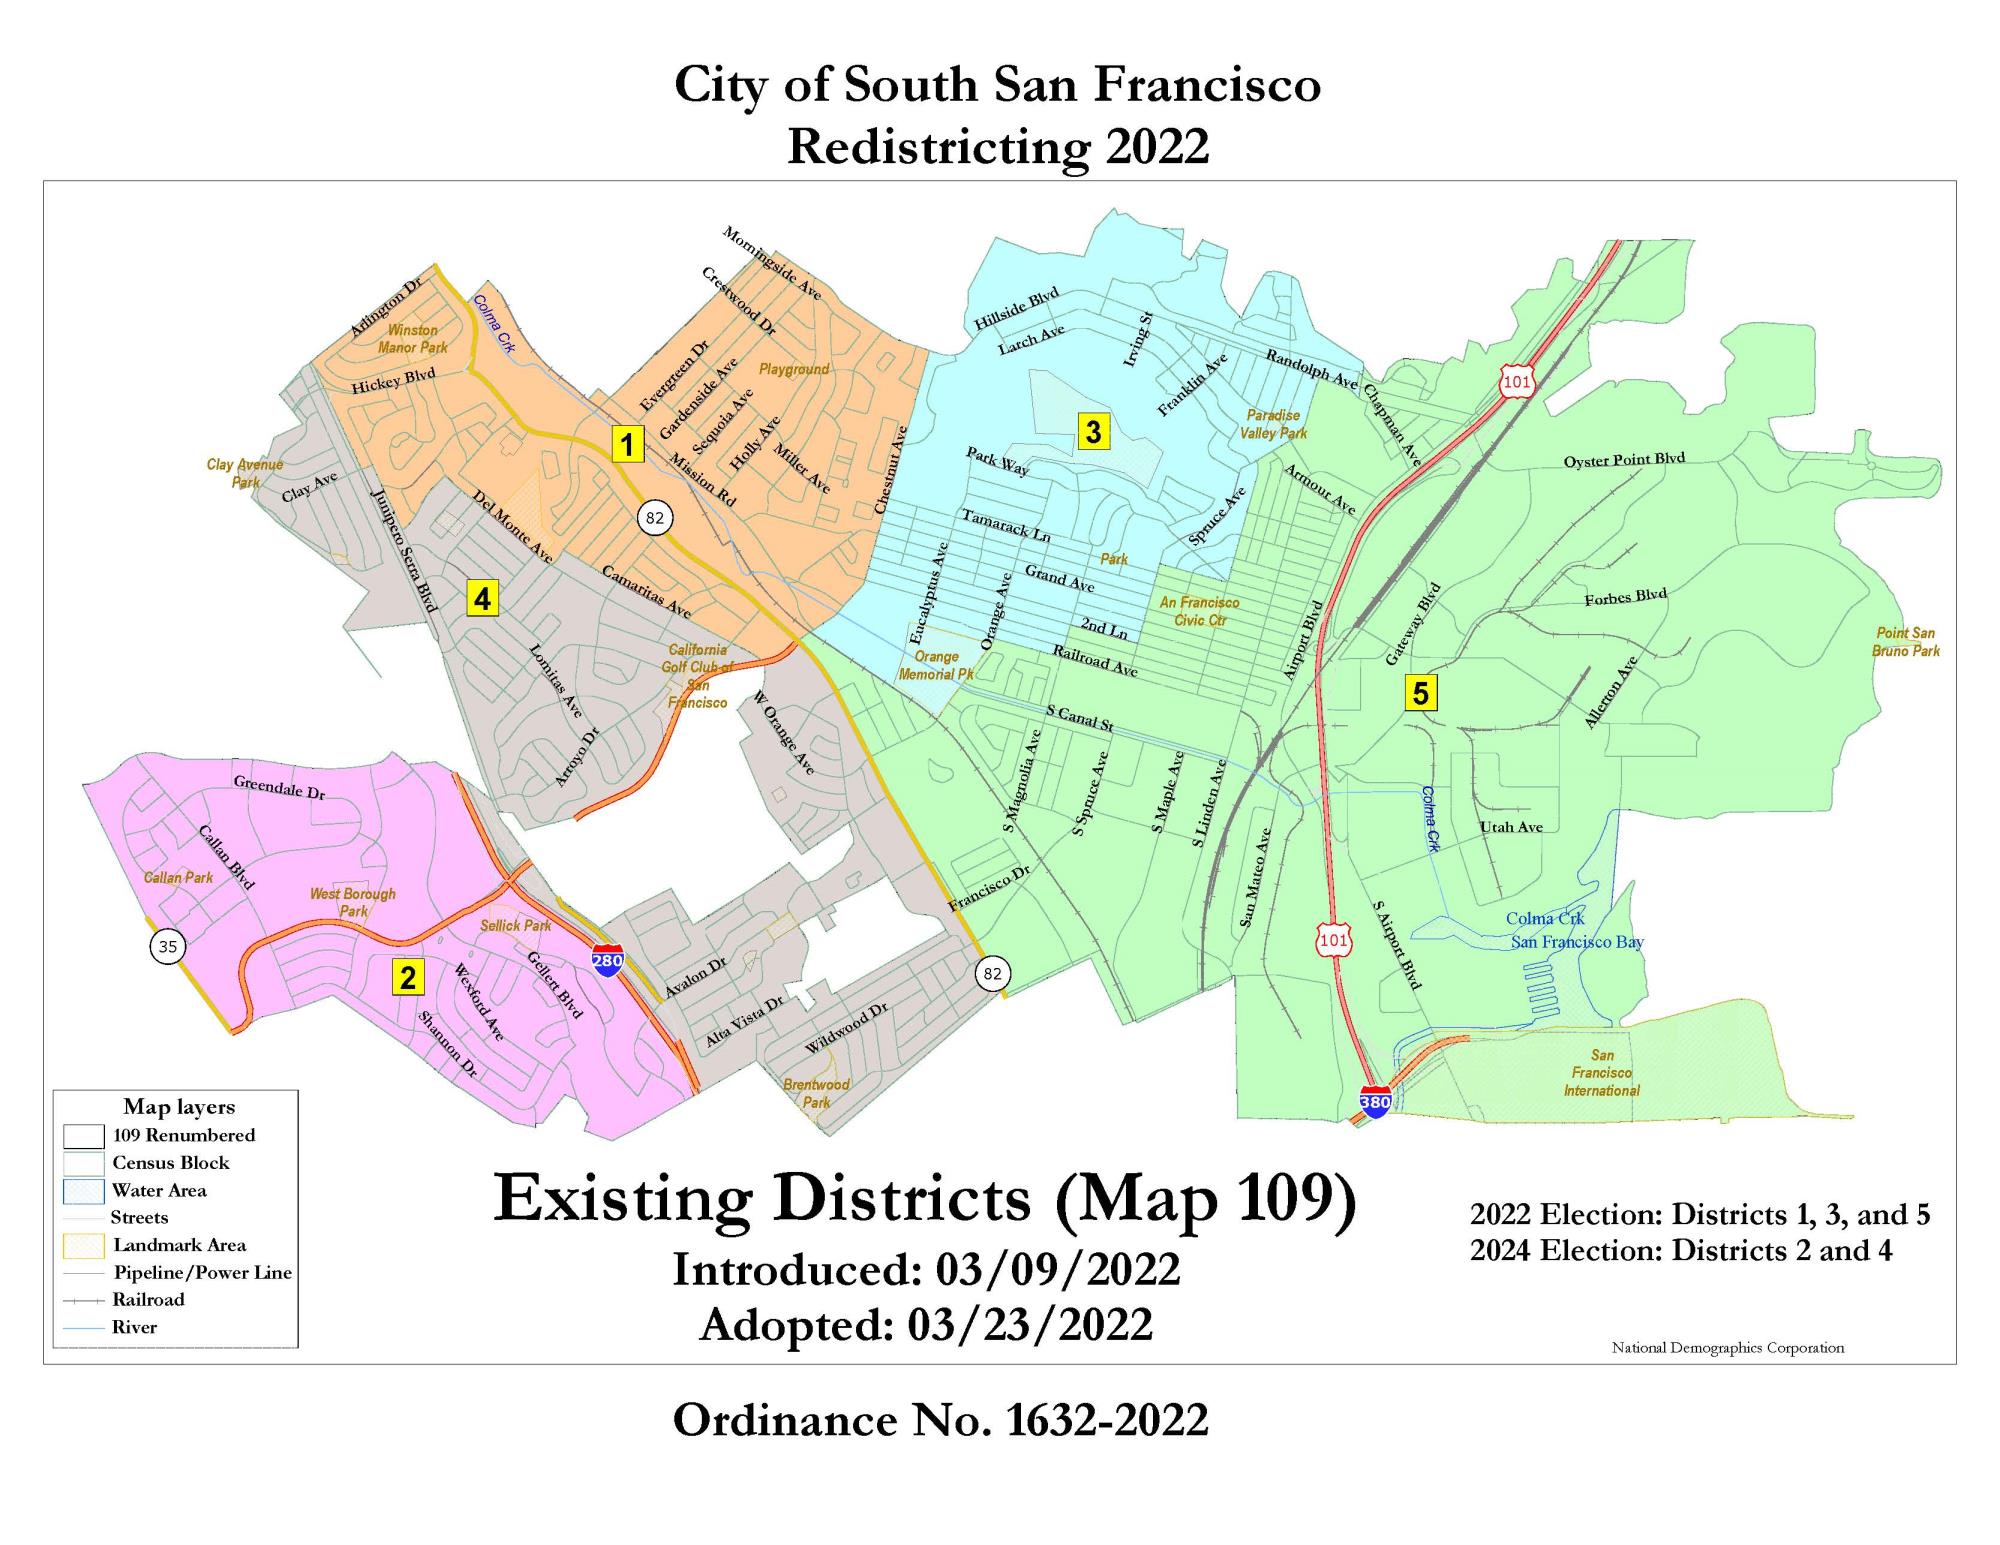 Existing Districts Map